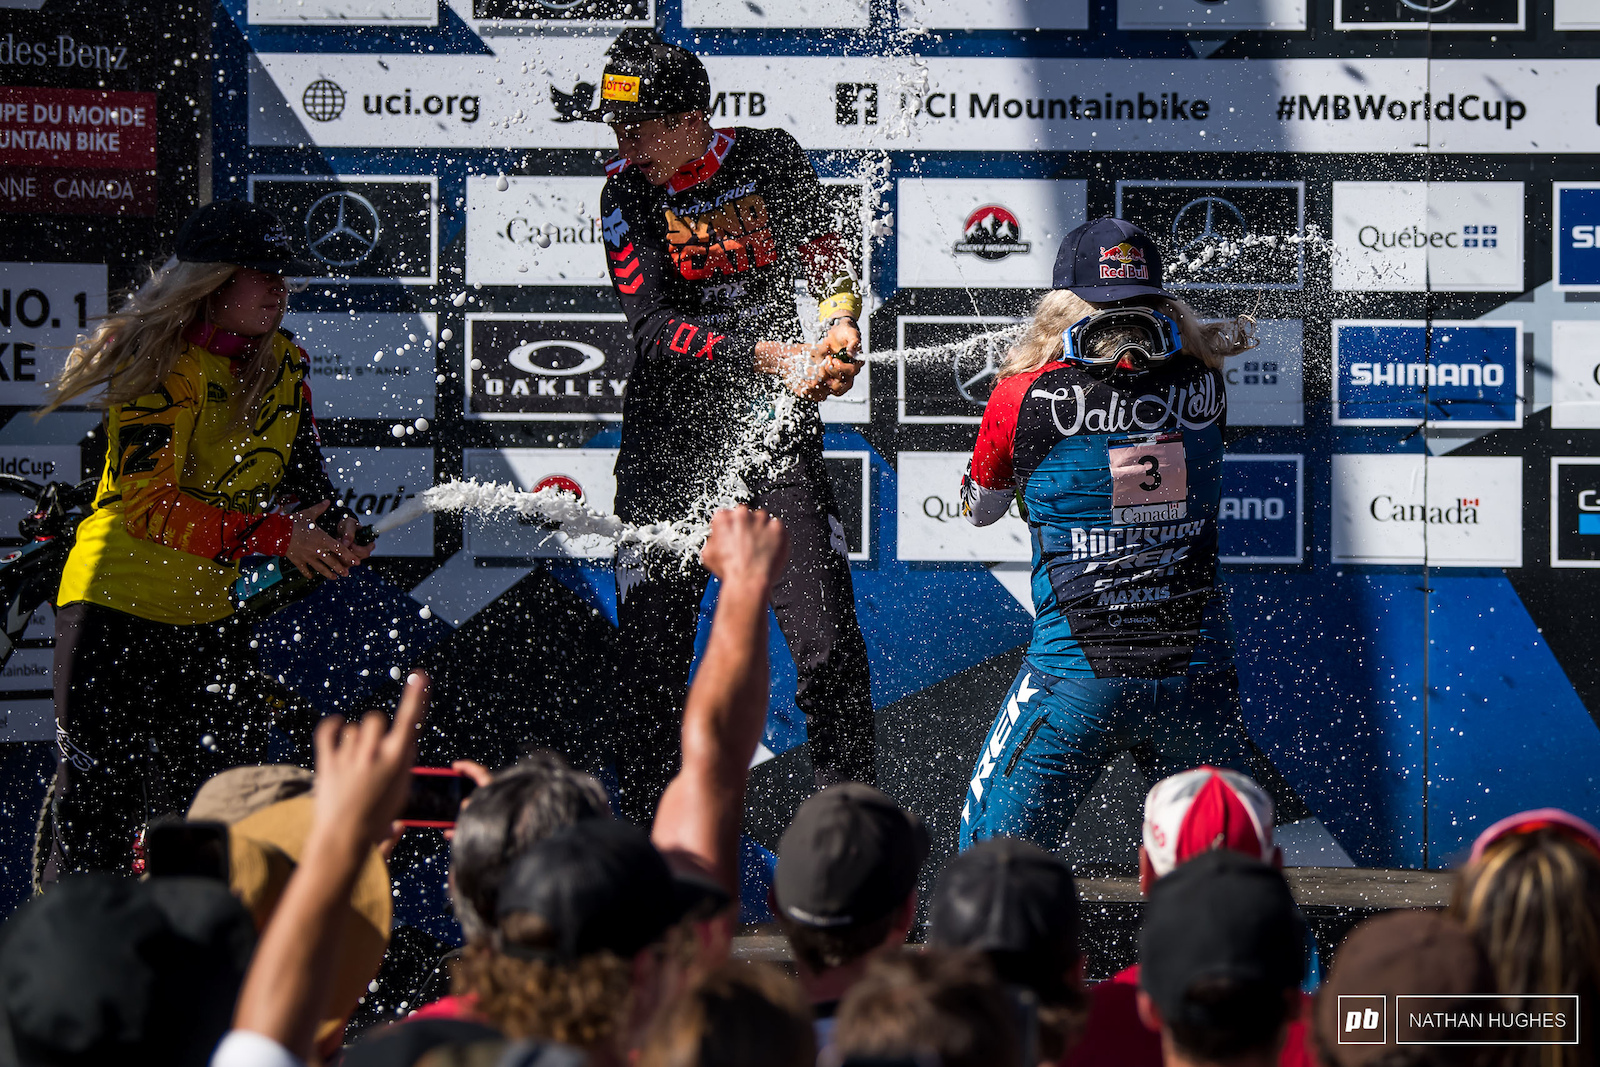 Champagne showers in Quebec.